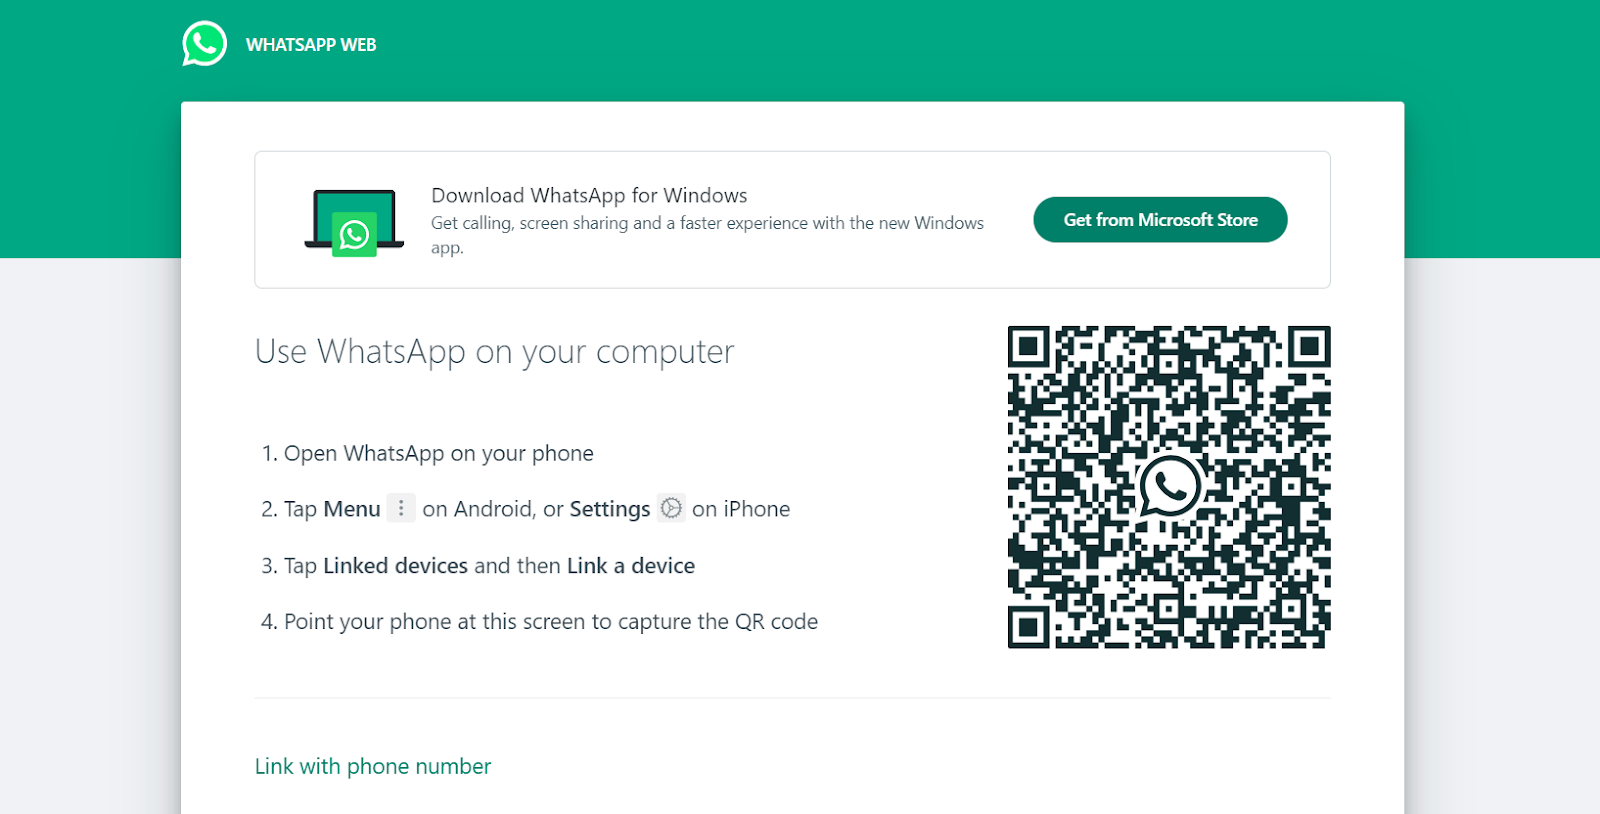 How To Schedule WhatsApp Messages On WhatsApp Web?